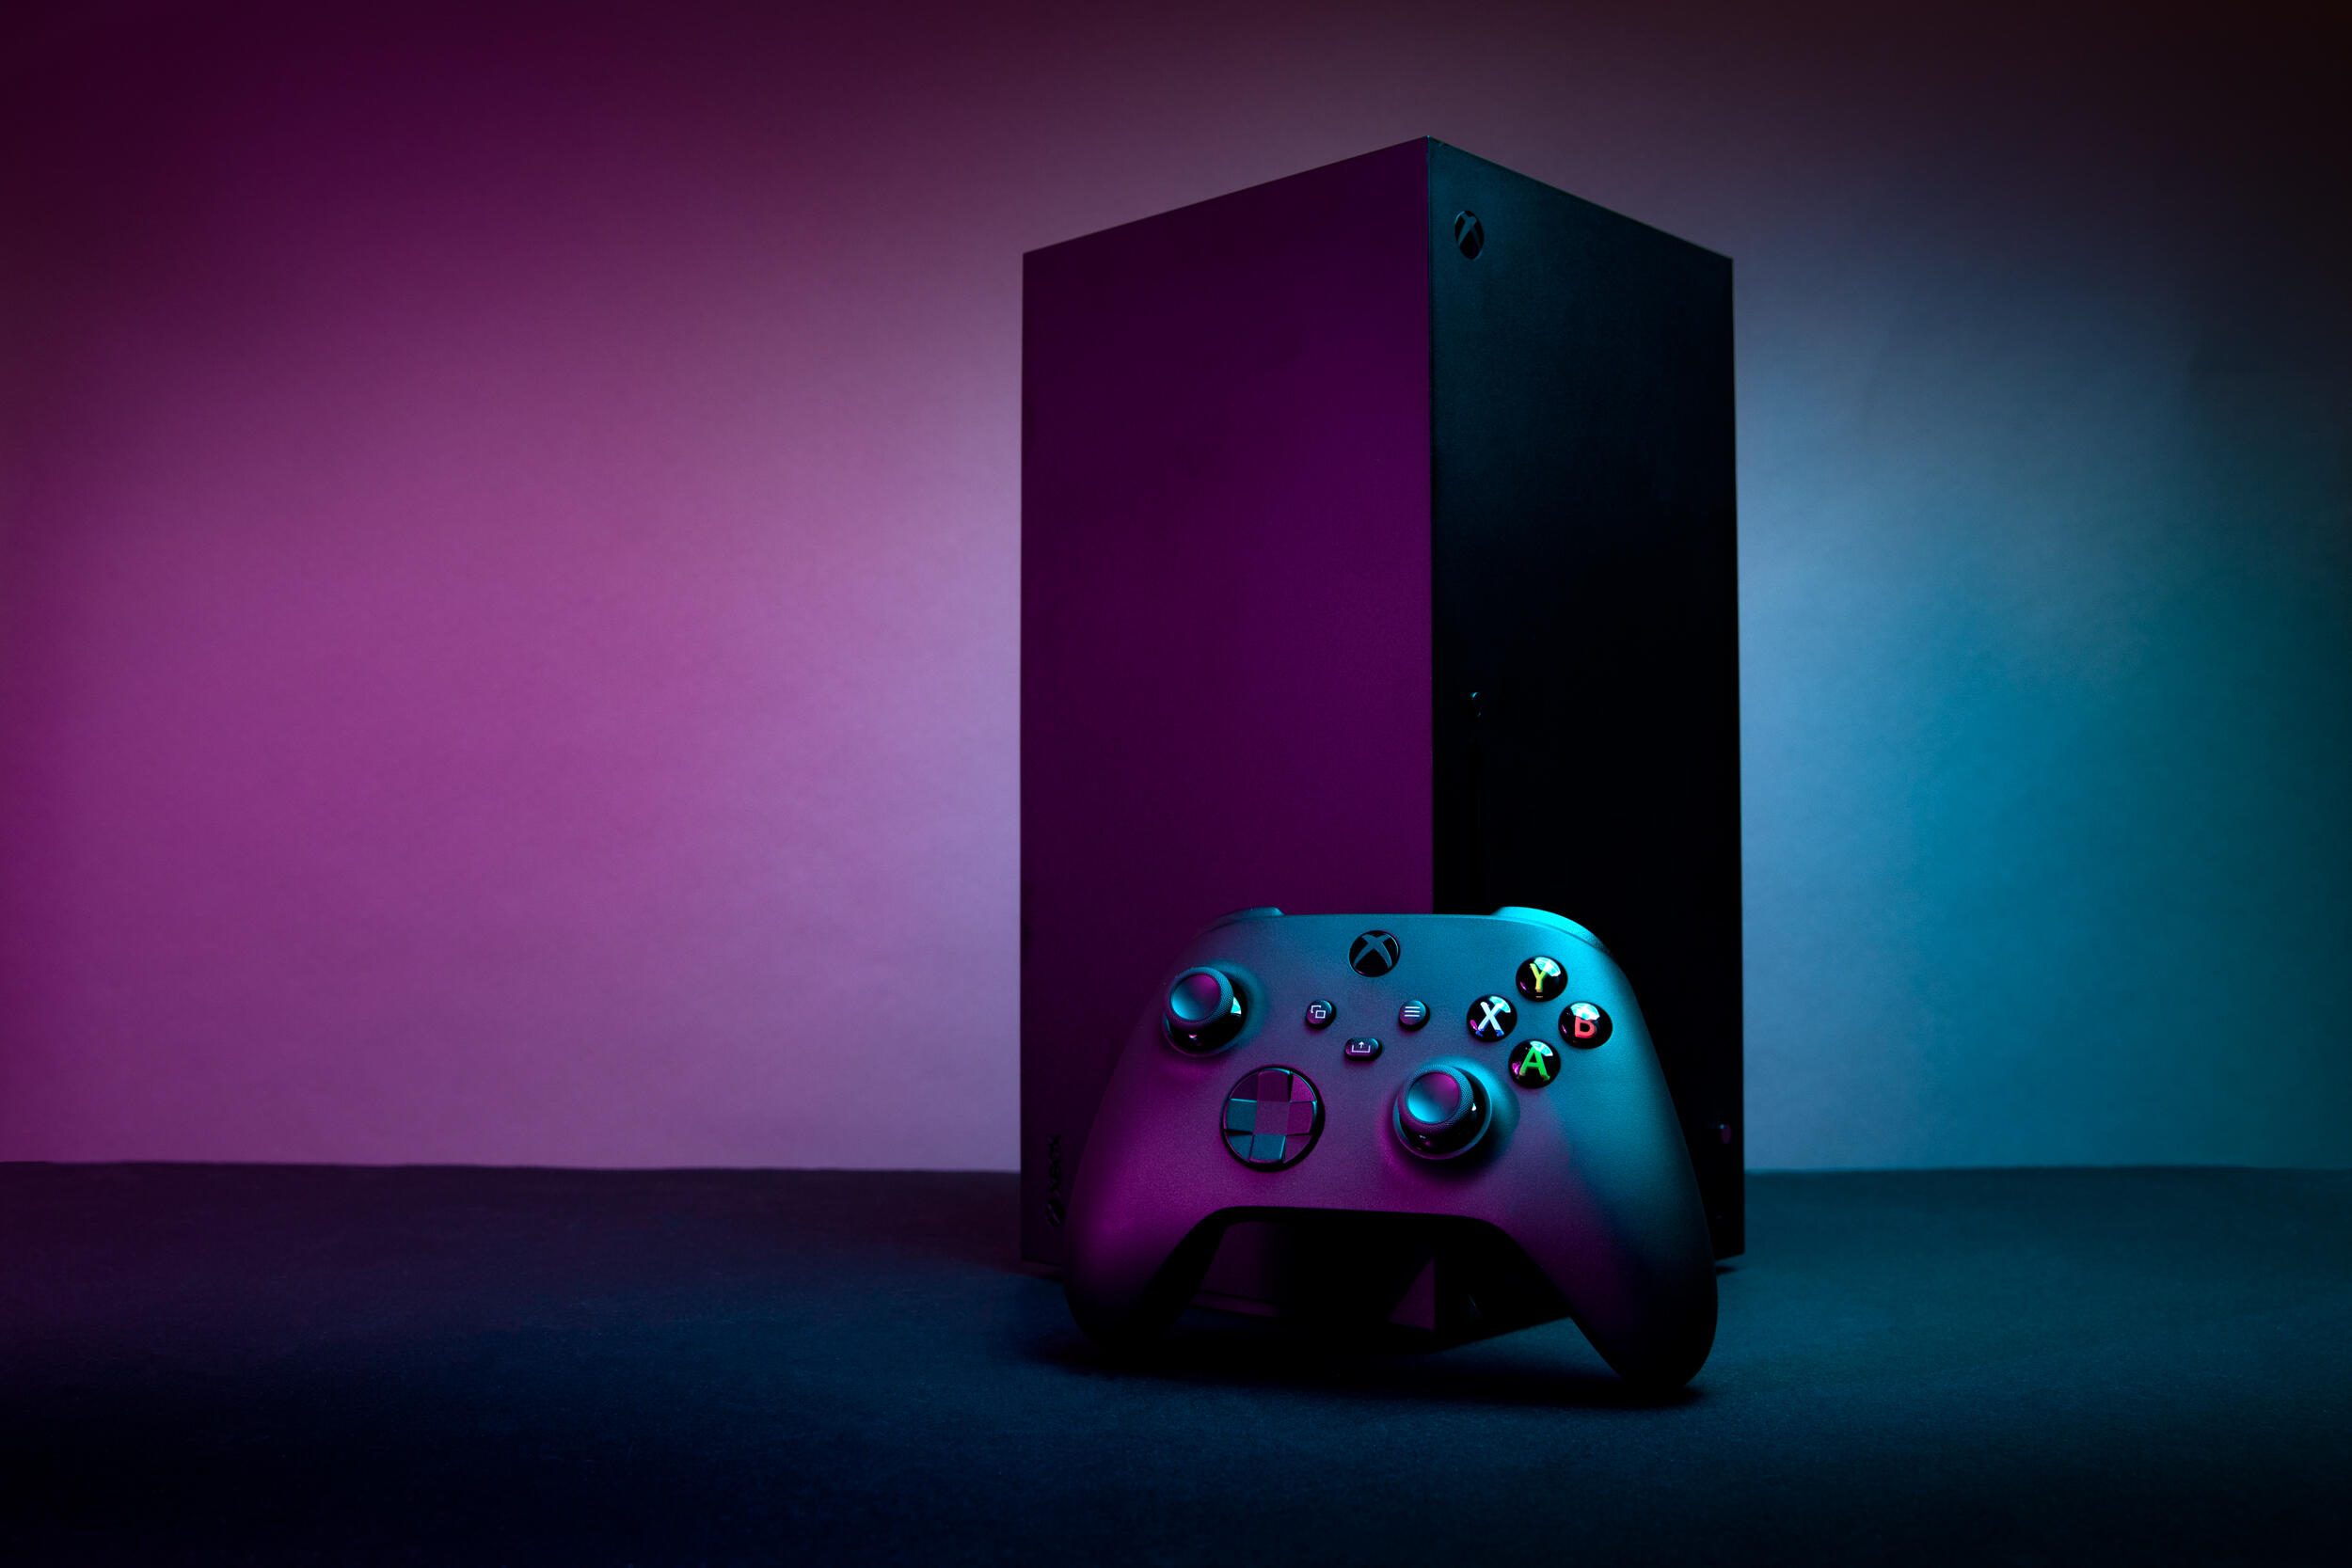 Xbox series x console on display